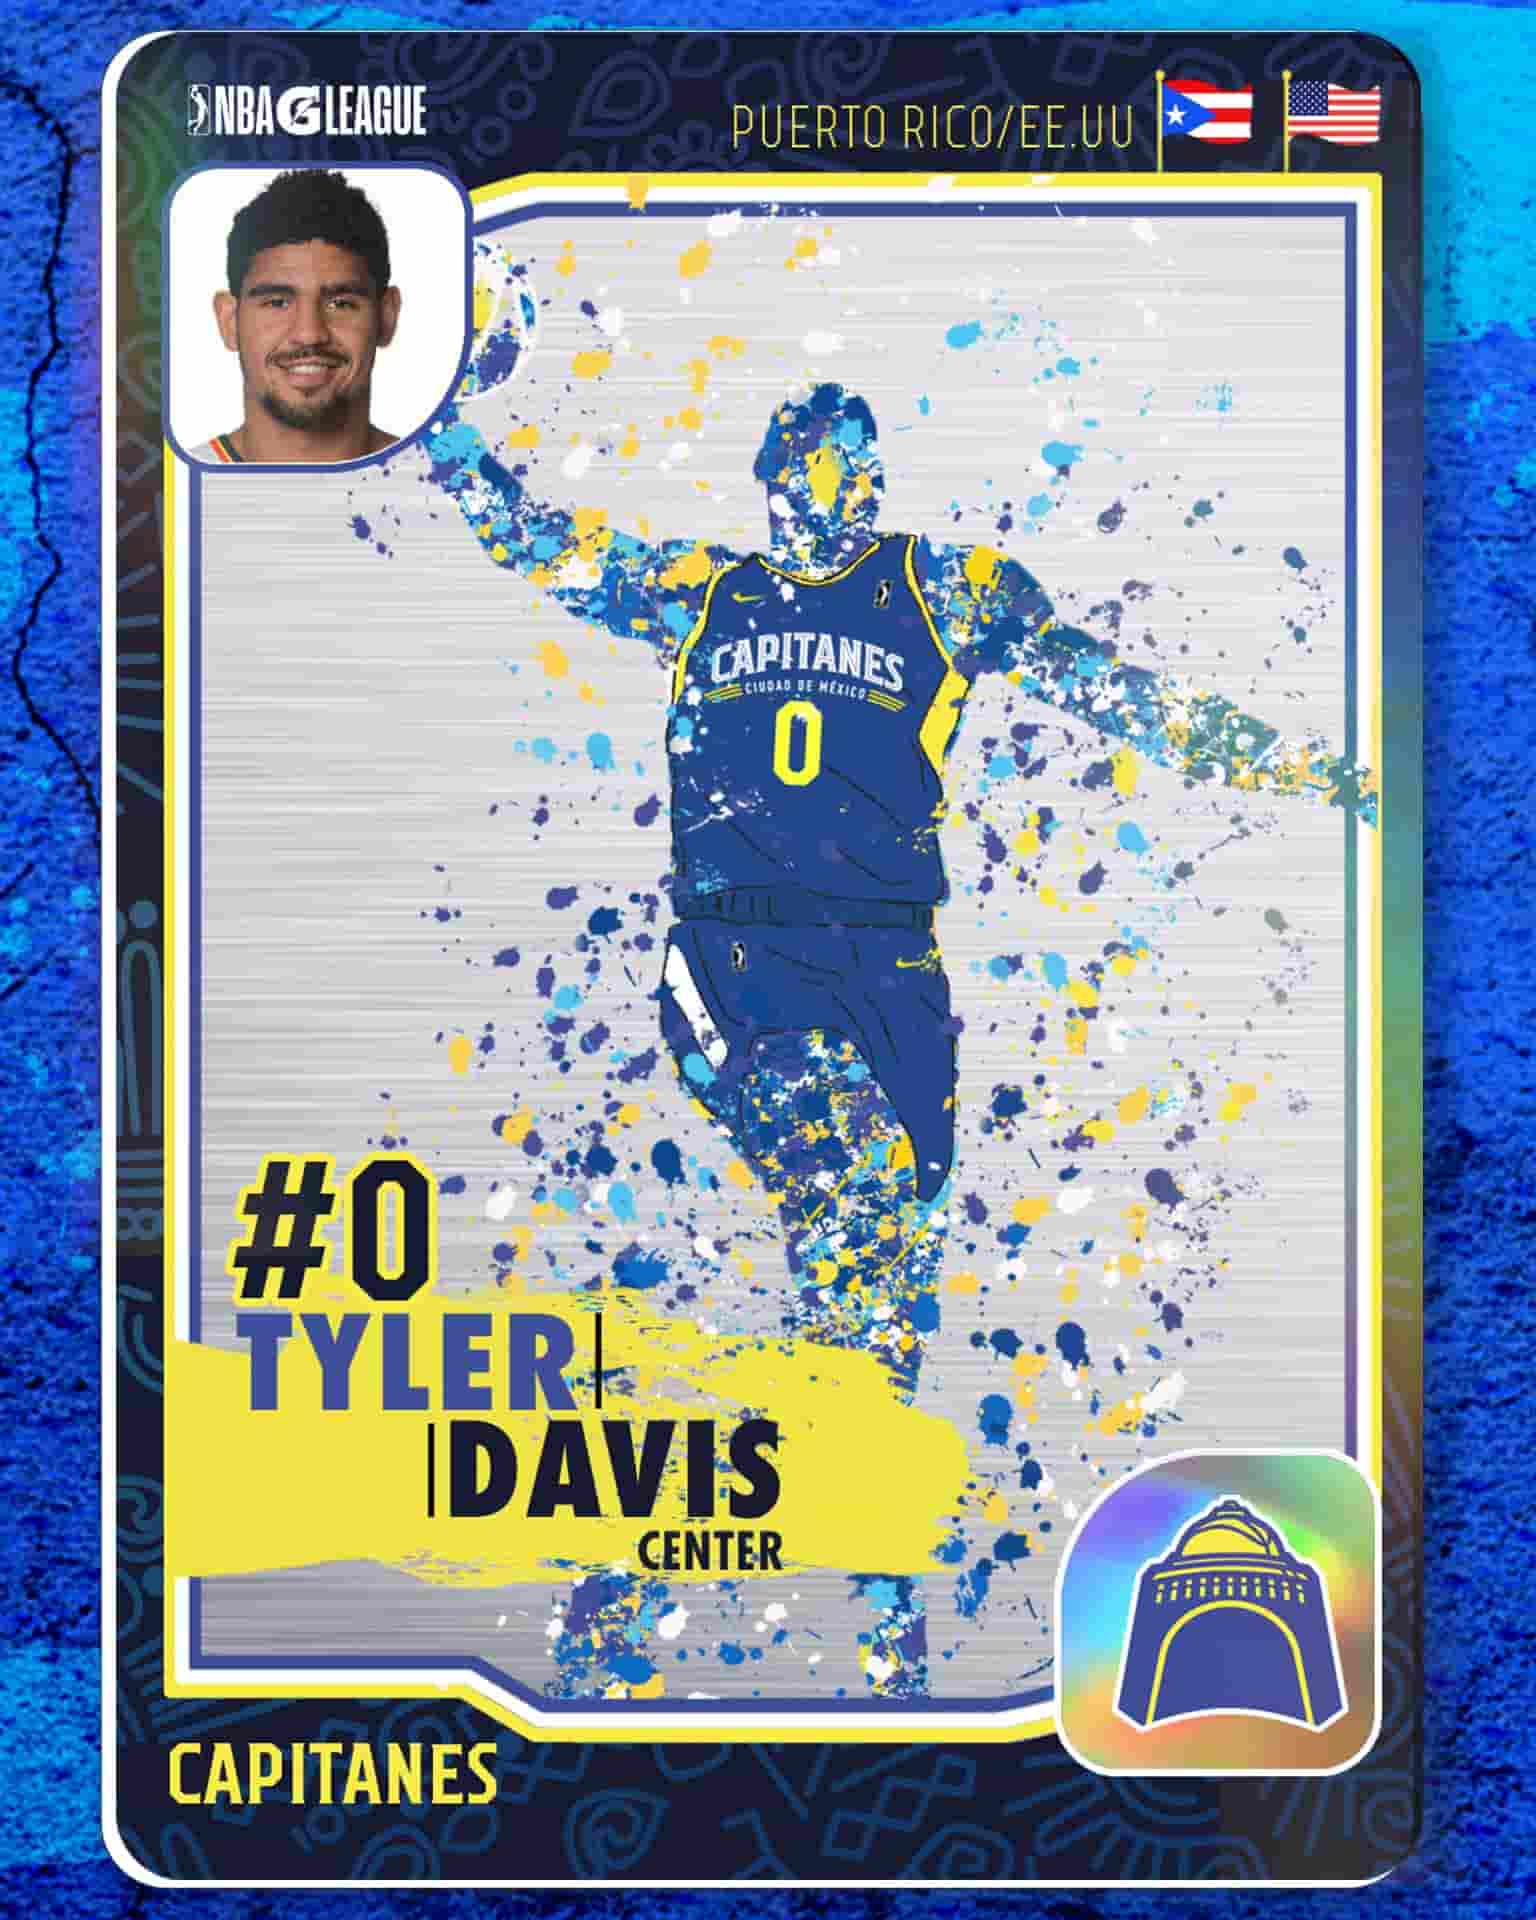 Tyler Davis, the first signing announced by Capitanes to debut in the G League